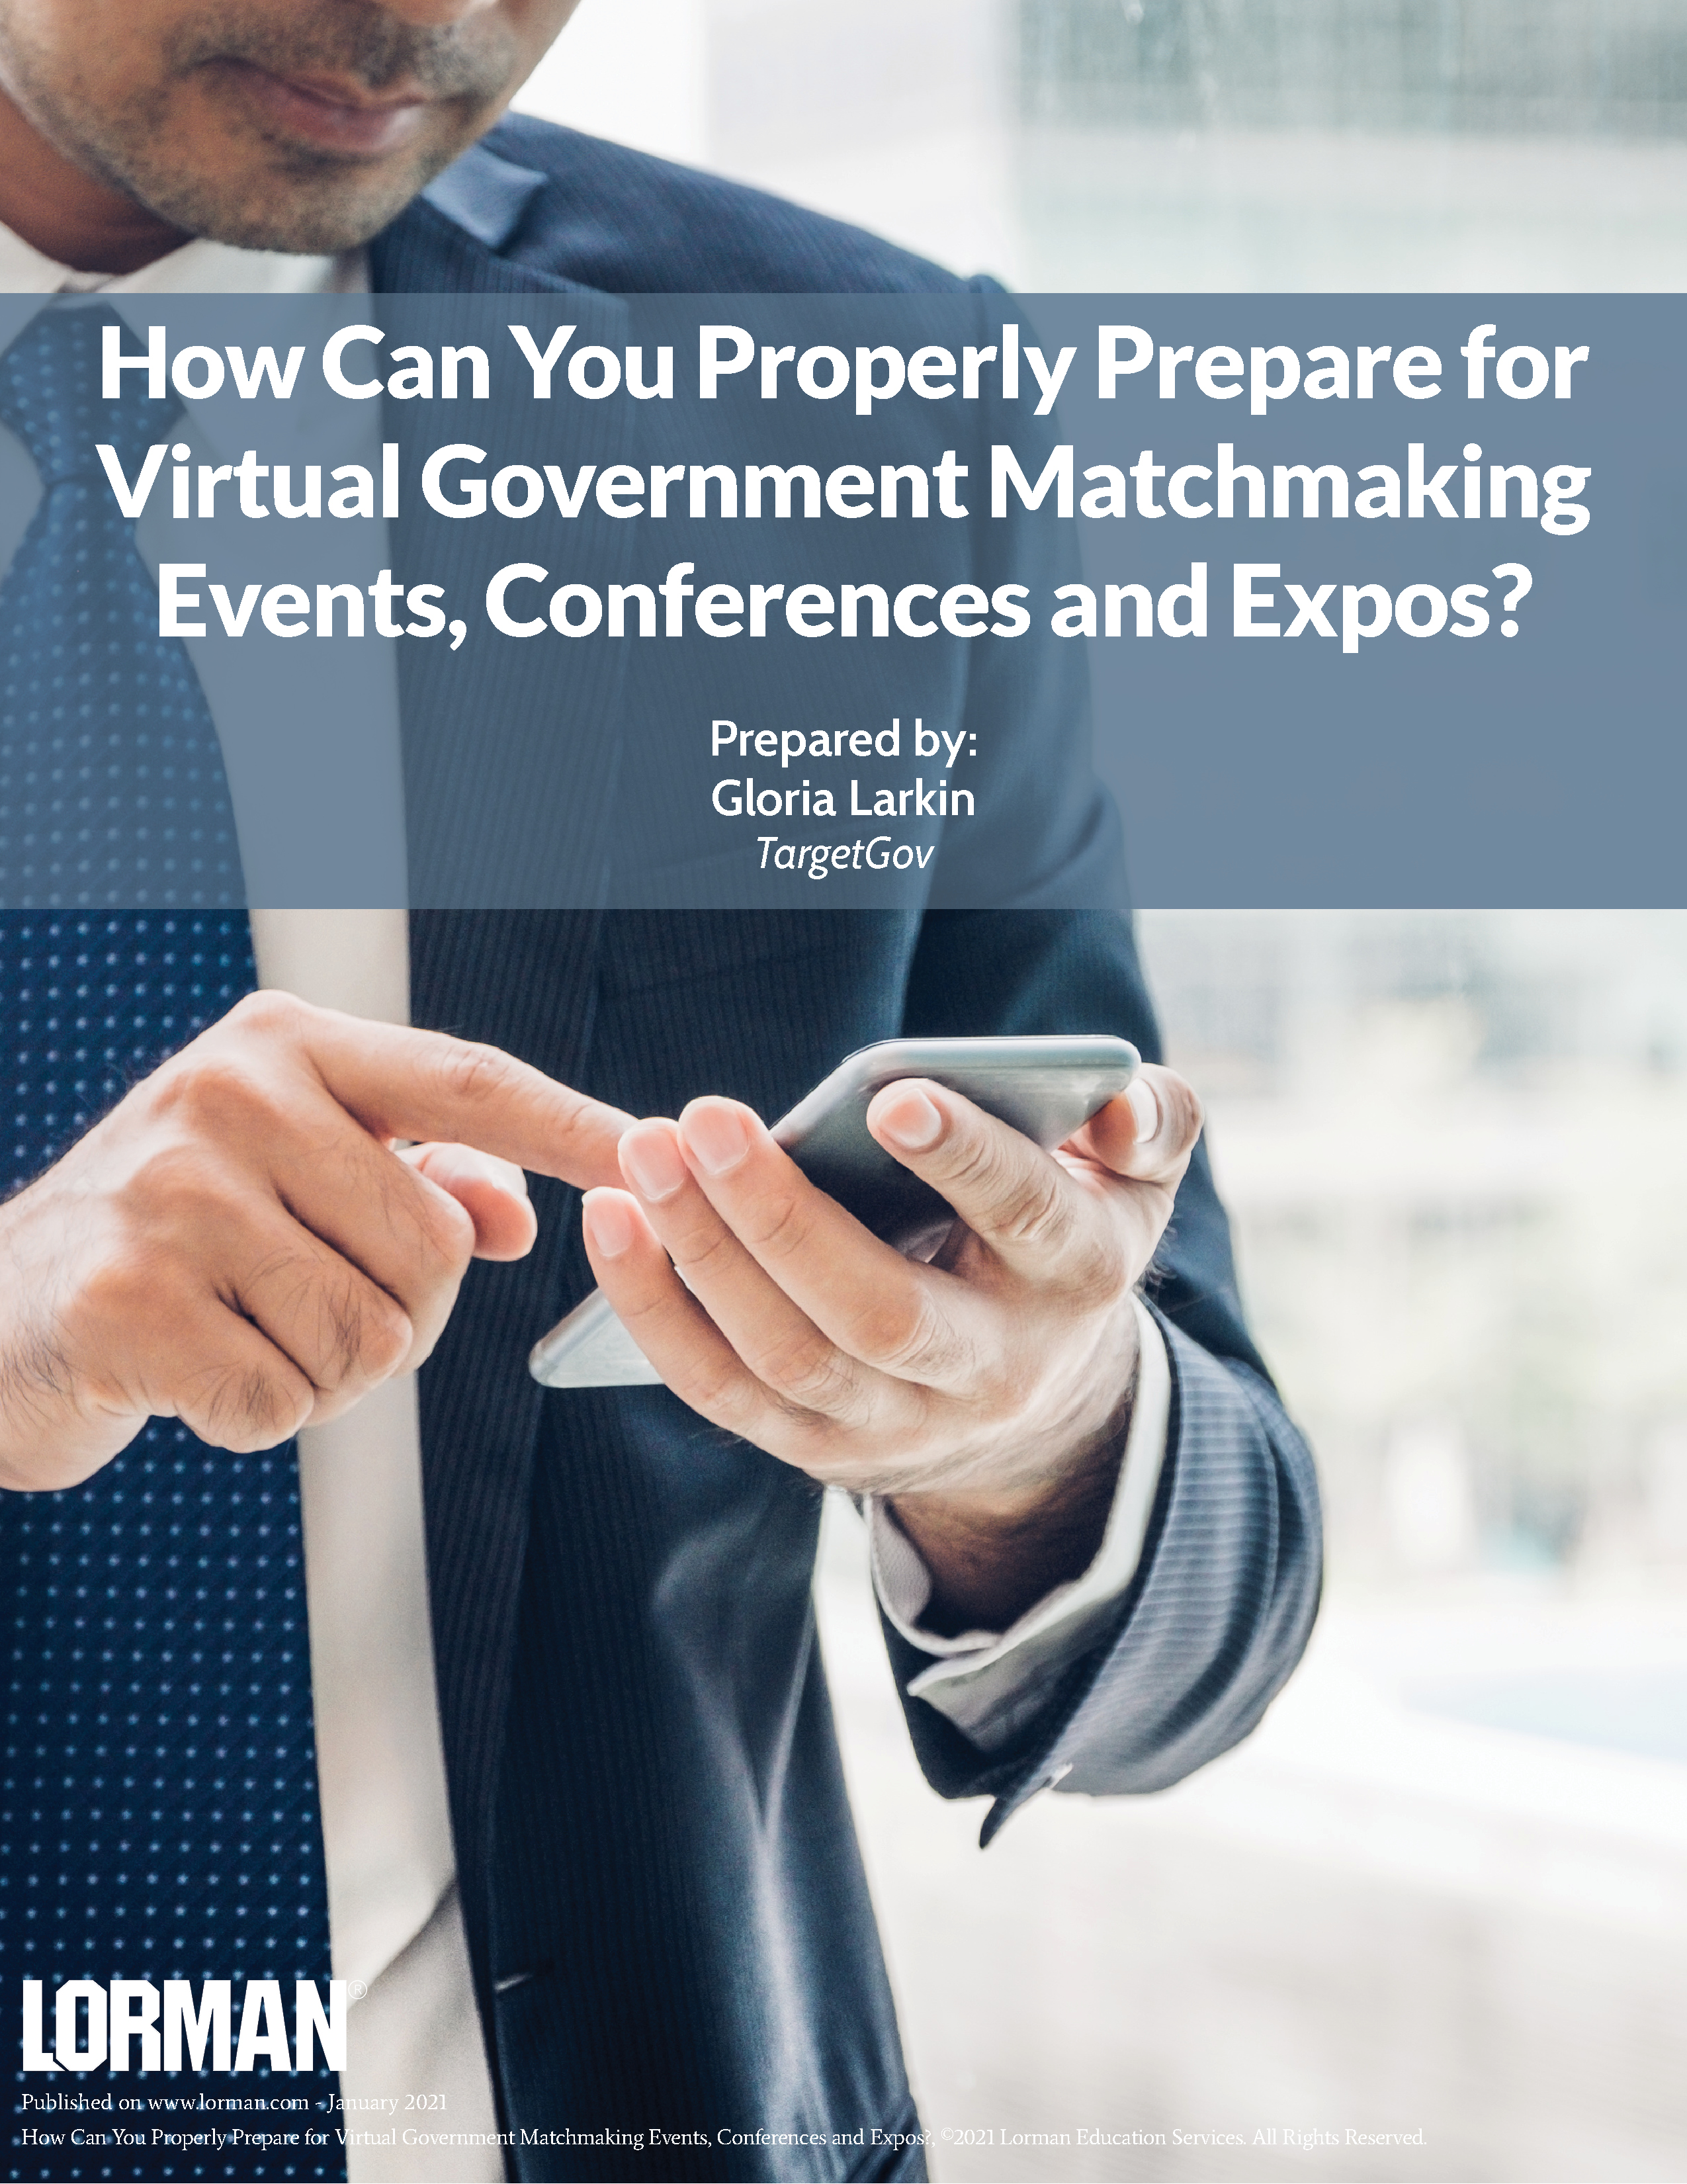 How Can You Properly Prepare for Virtual Government Matchmaking Events, Conferences and Expos?